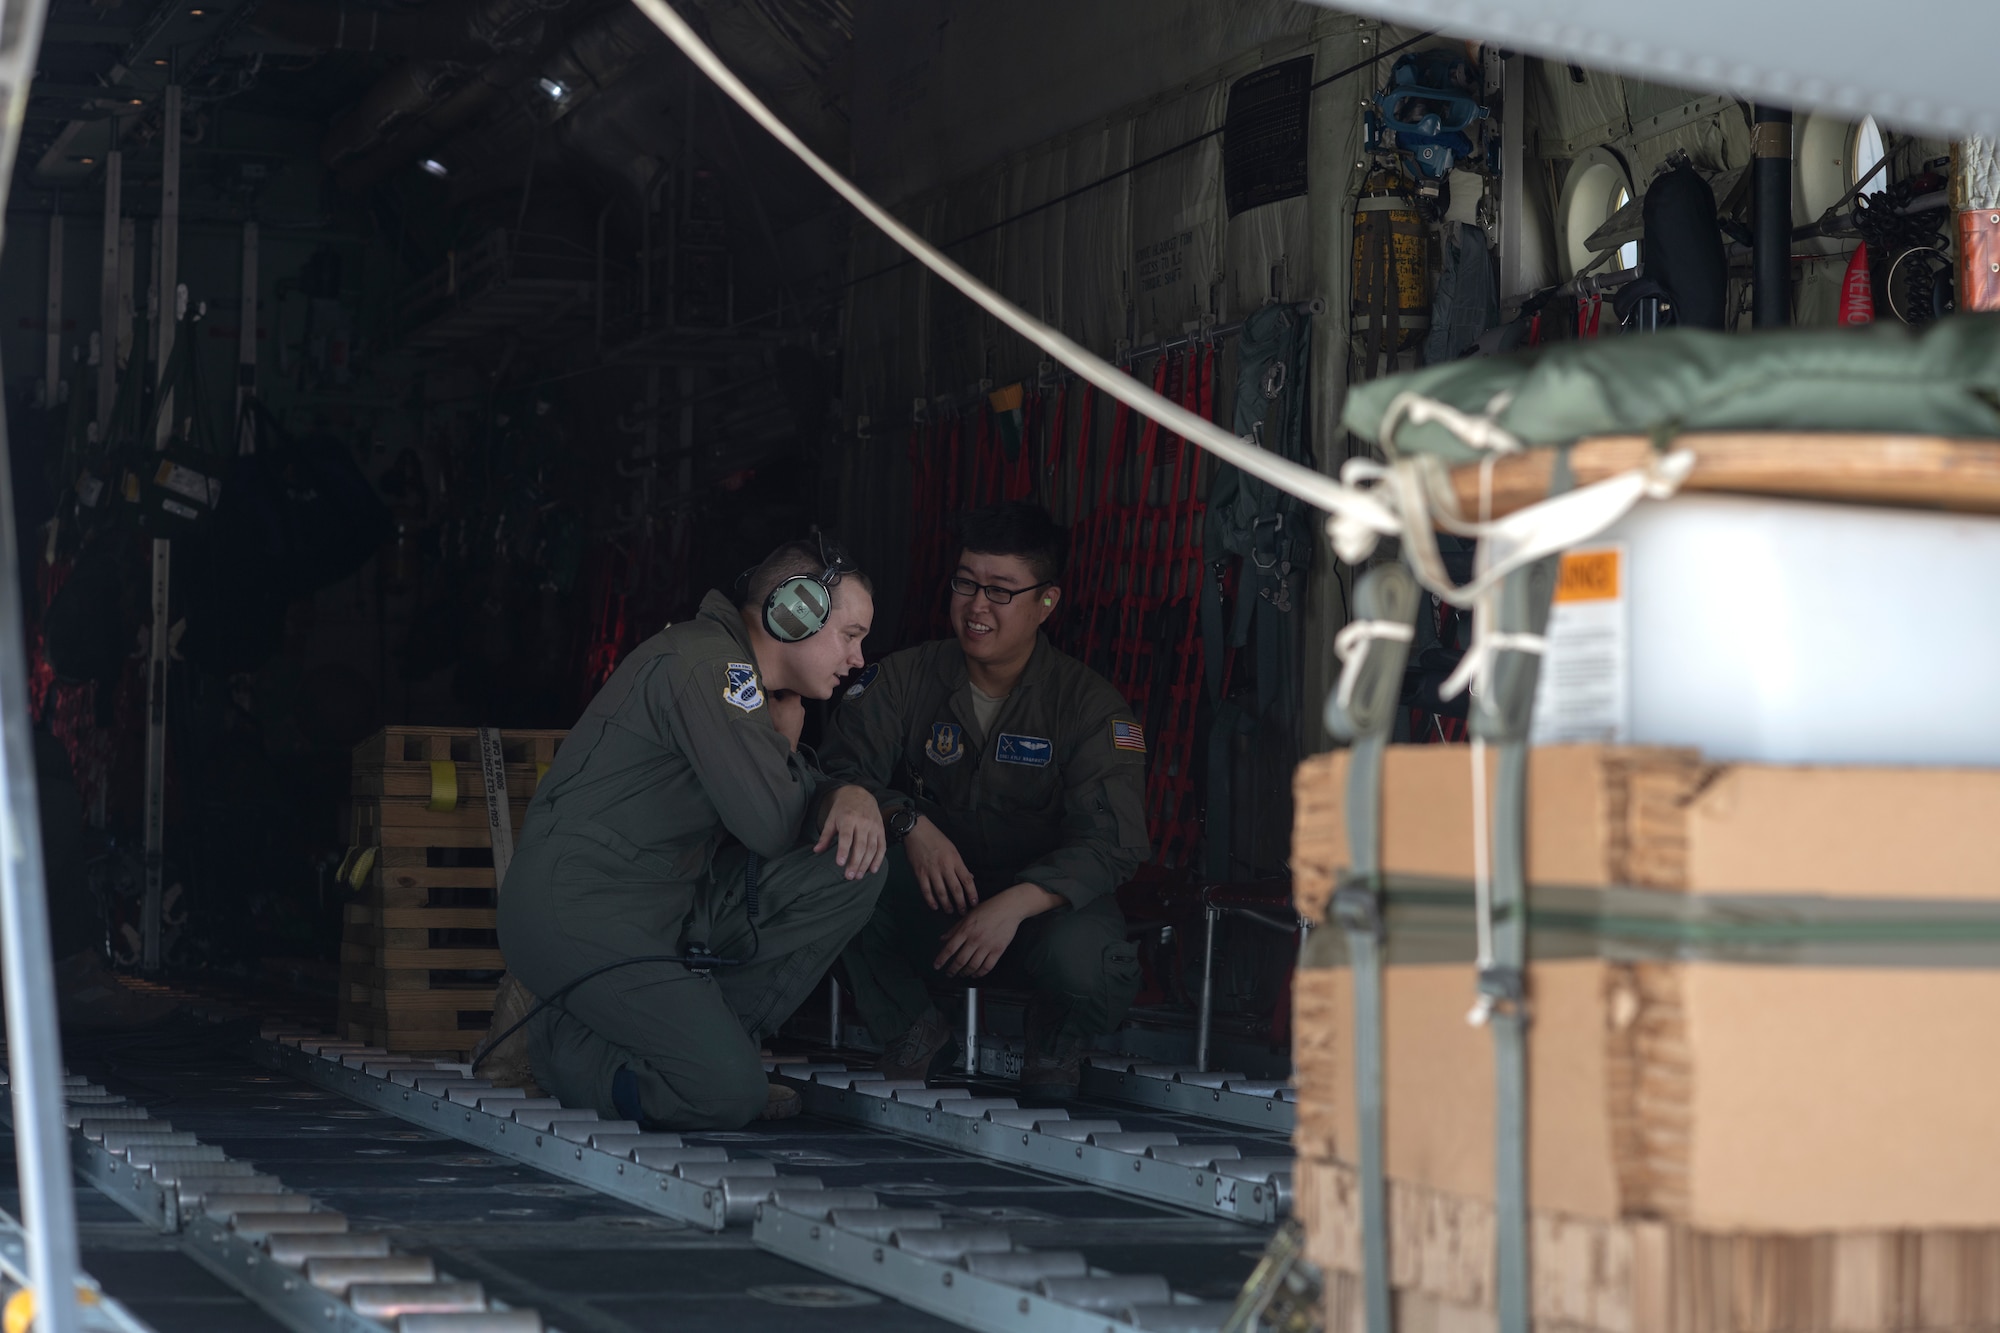 Airmen assigned to the 357th Airlift Squadron, 908th Airlift Wing, Maxwell Air Force Base, Alabama, prepare for a takeoff in support of Carpathian Summer 19, July 31, 2019, at Otopeni Air Base, Romania.